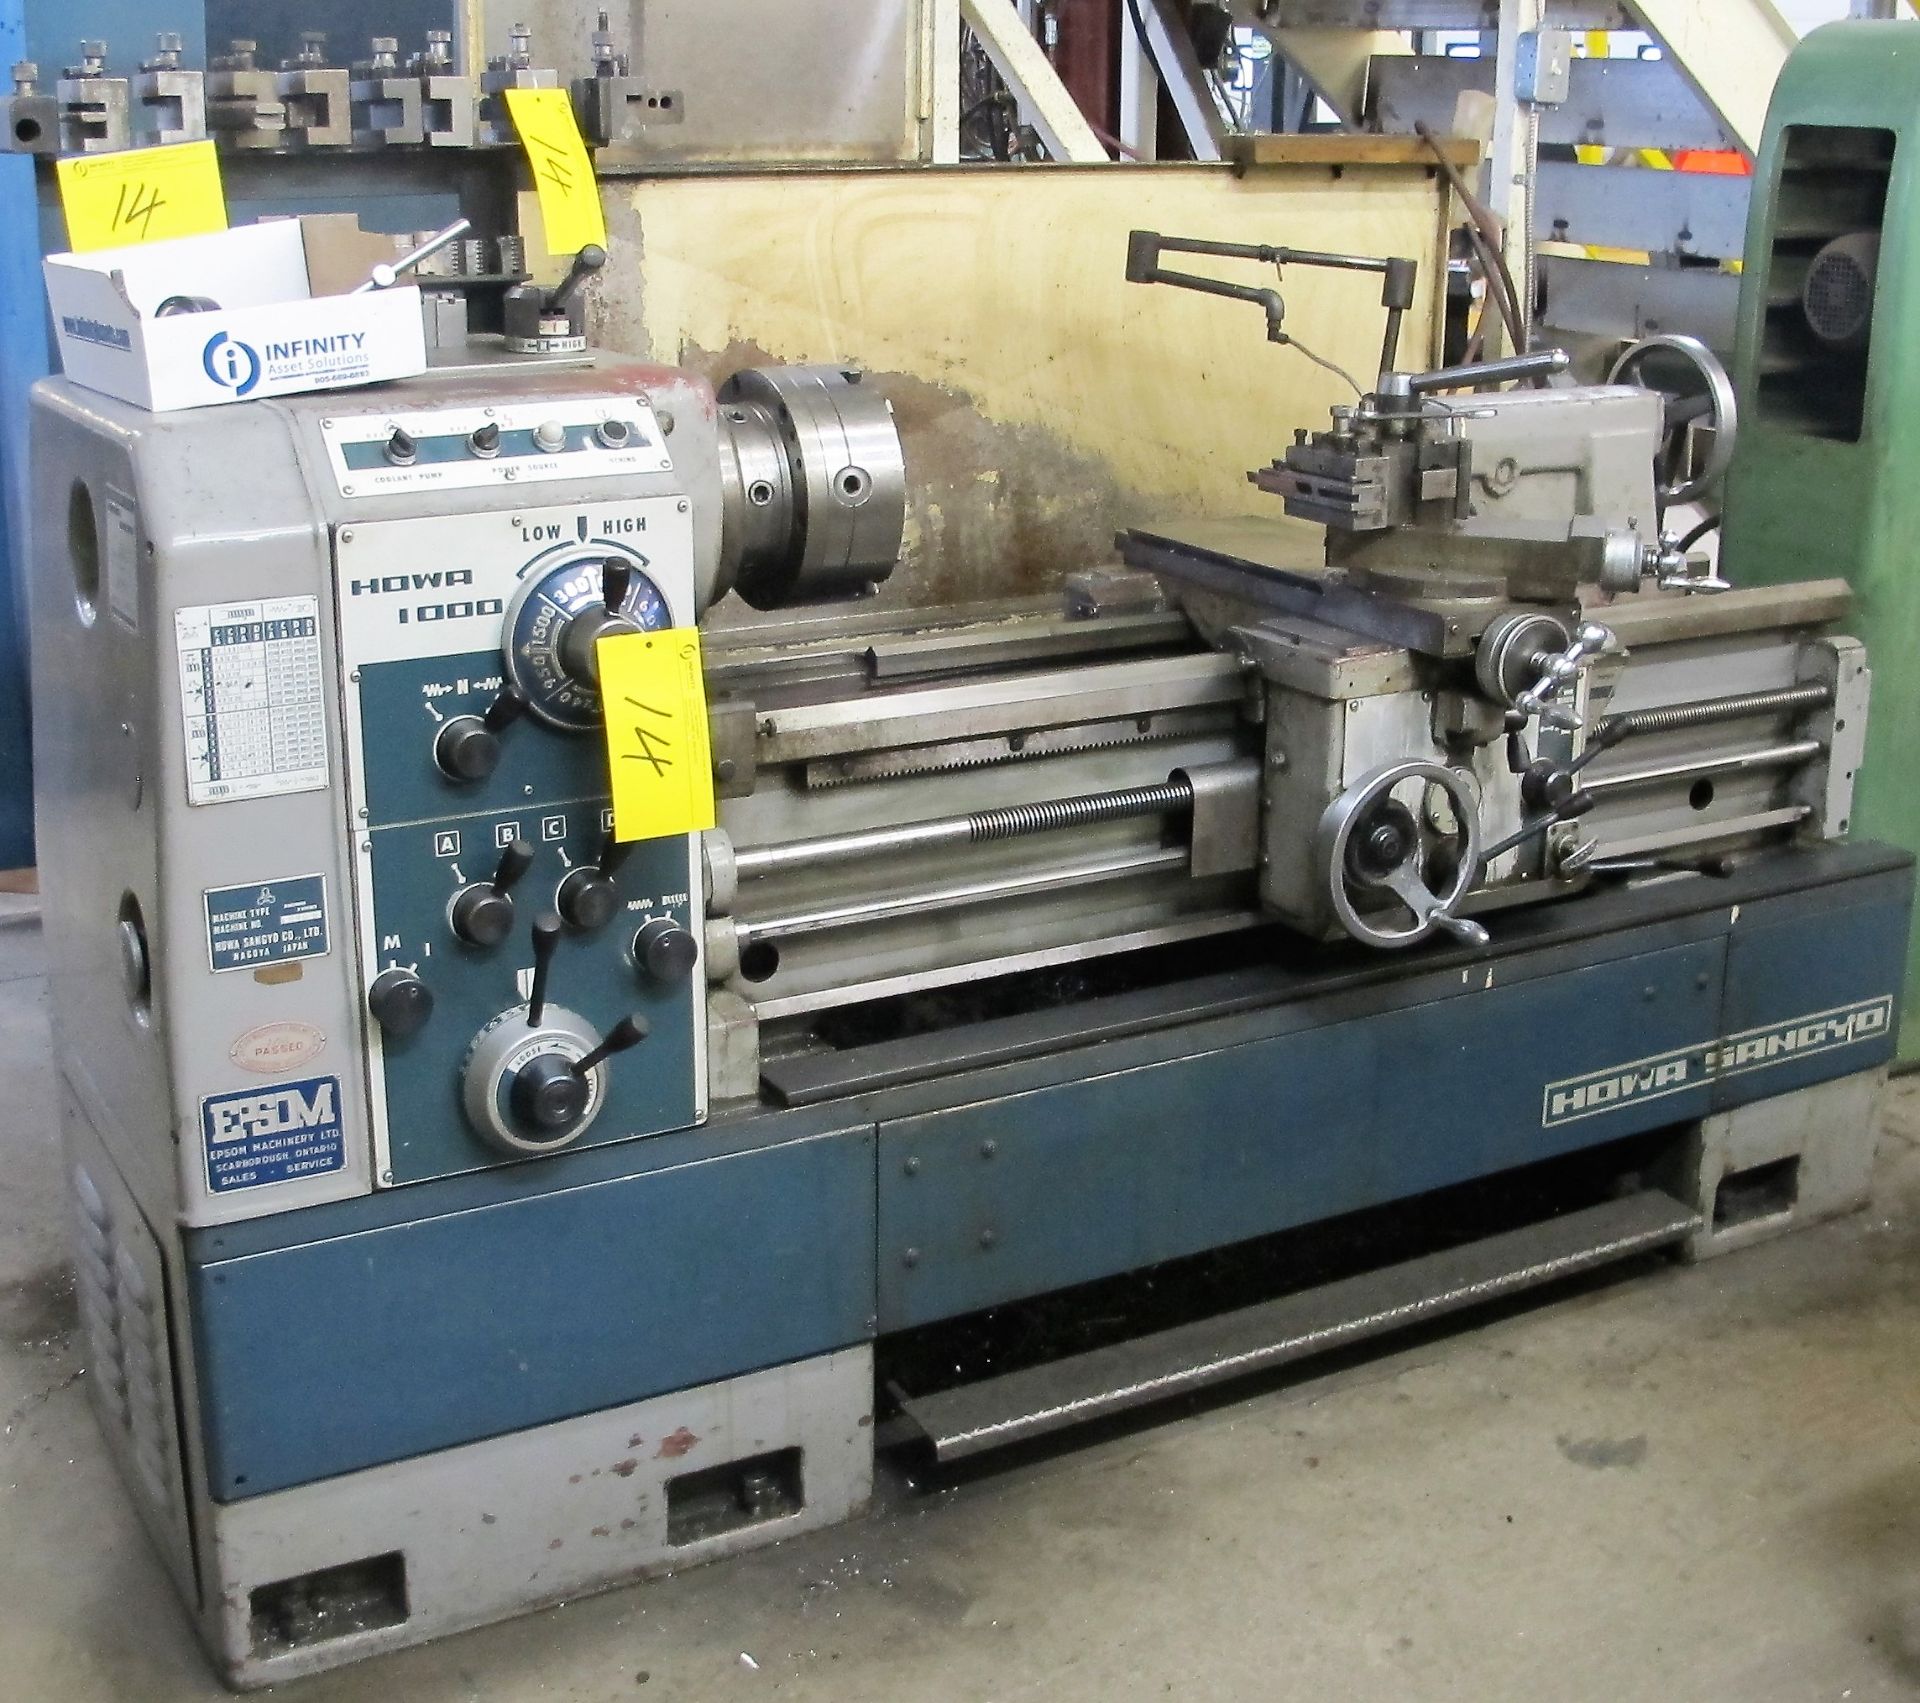 HOWA SANGYO 1000 ENGINE LATHE, S/N 10409, 9" 3-JAW CHUCK, 20" SWING, 54" BED, TAILSTOCK, TOOL